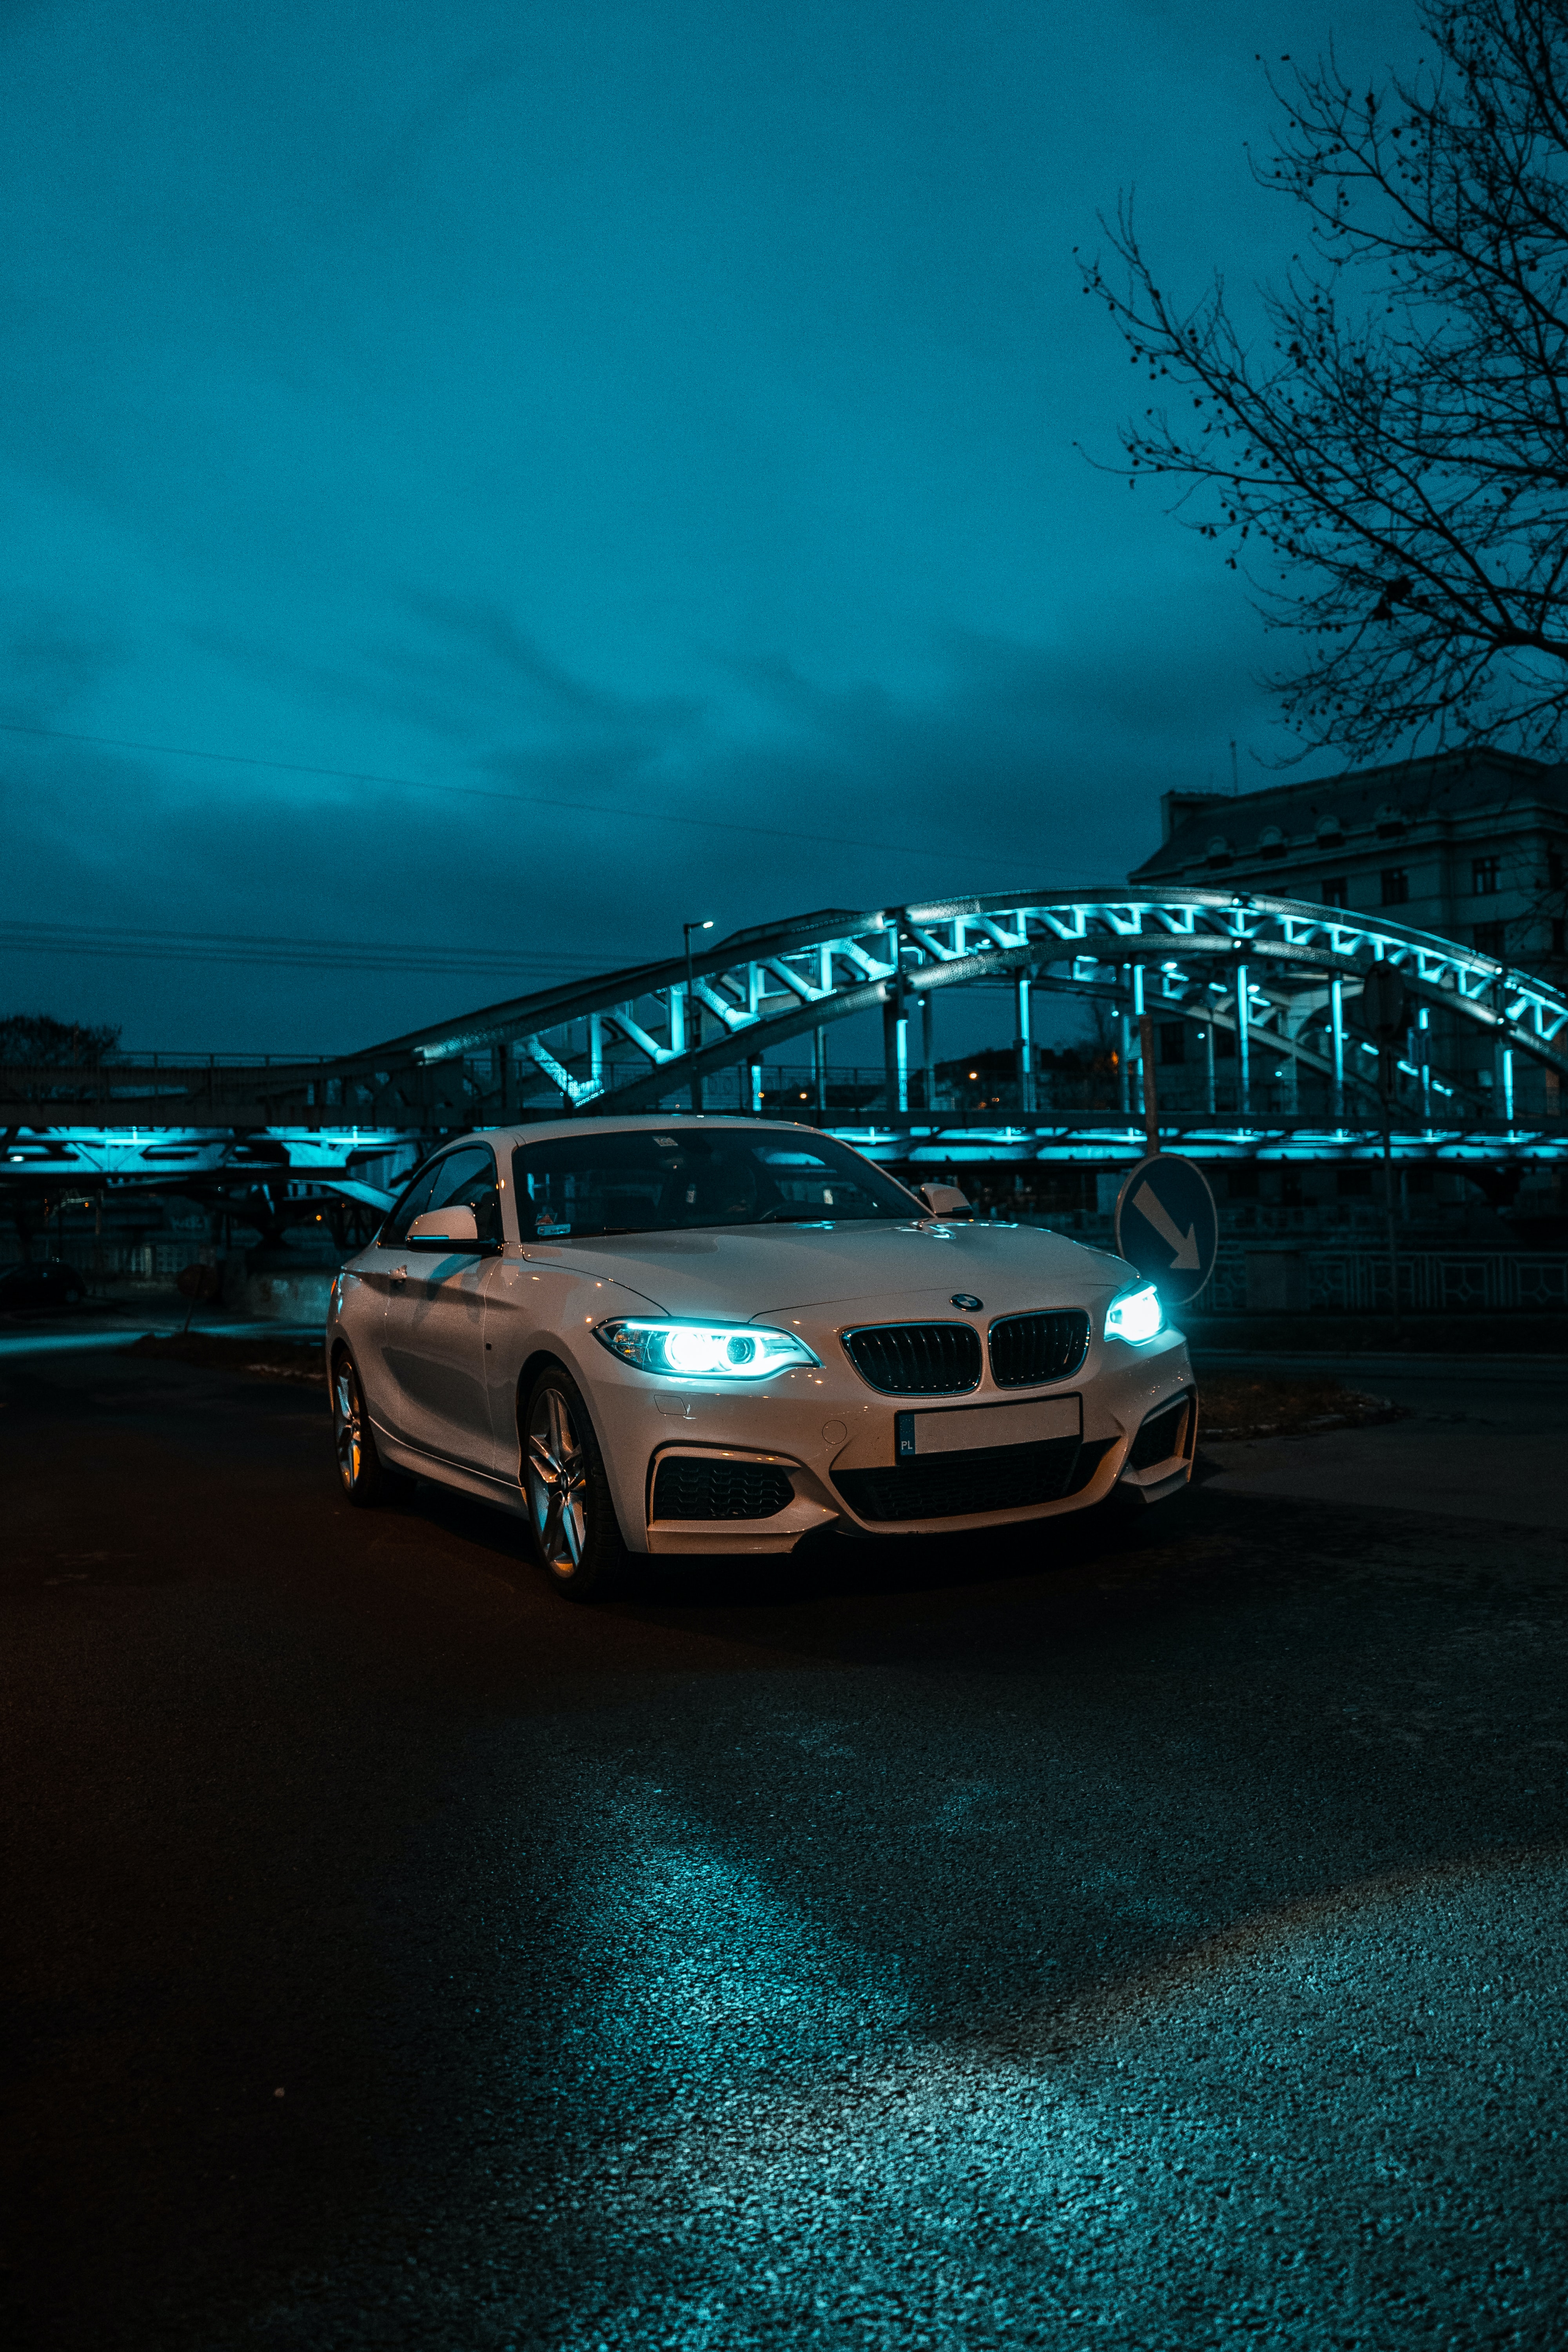 Free HD cars, bmw, white, lights, front view, headlights